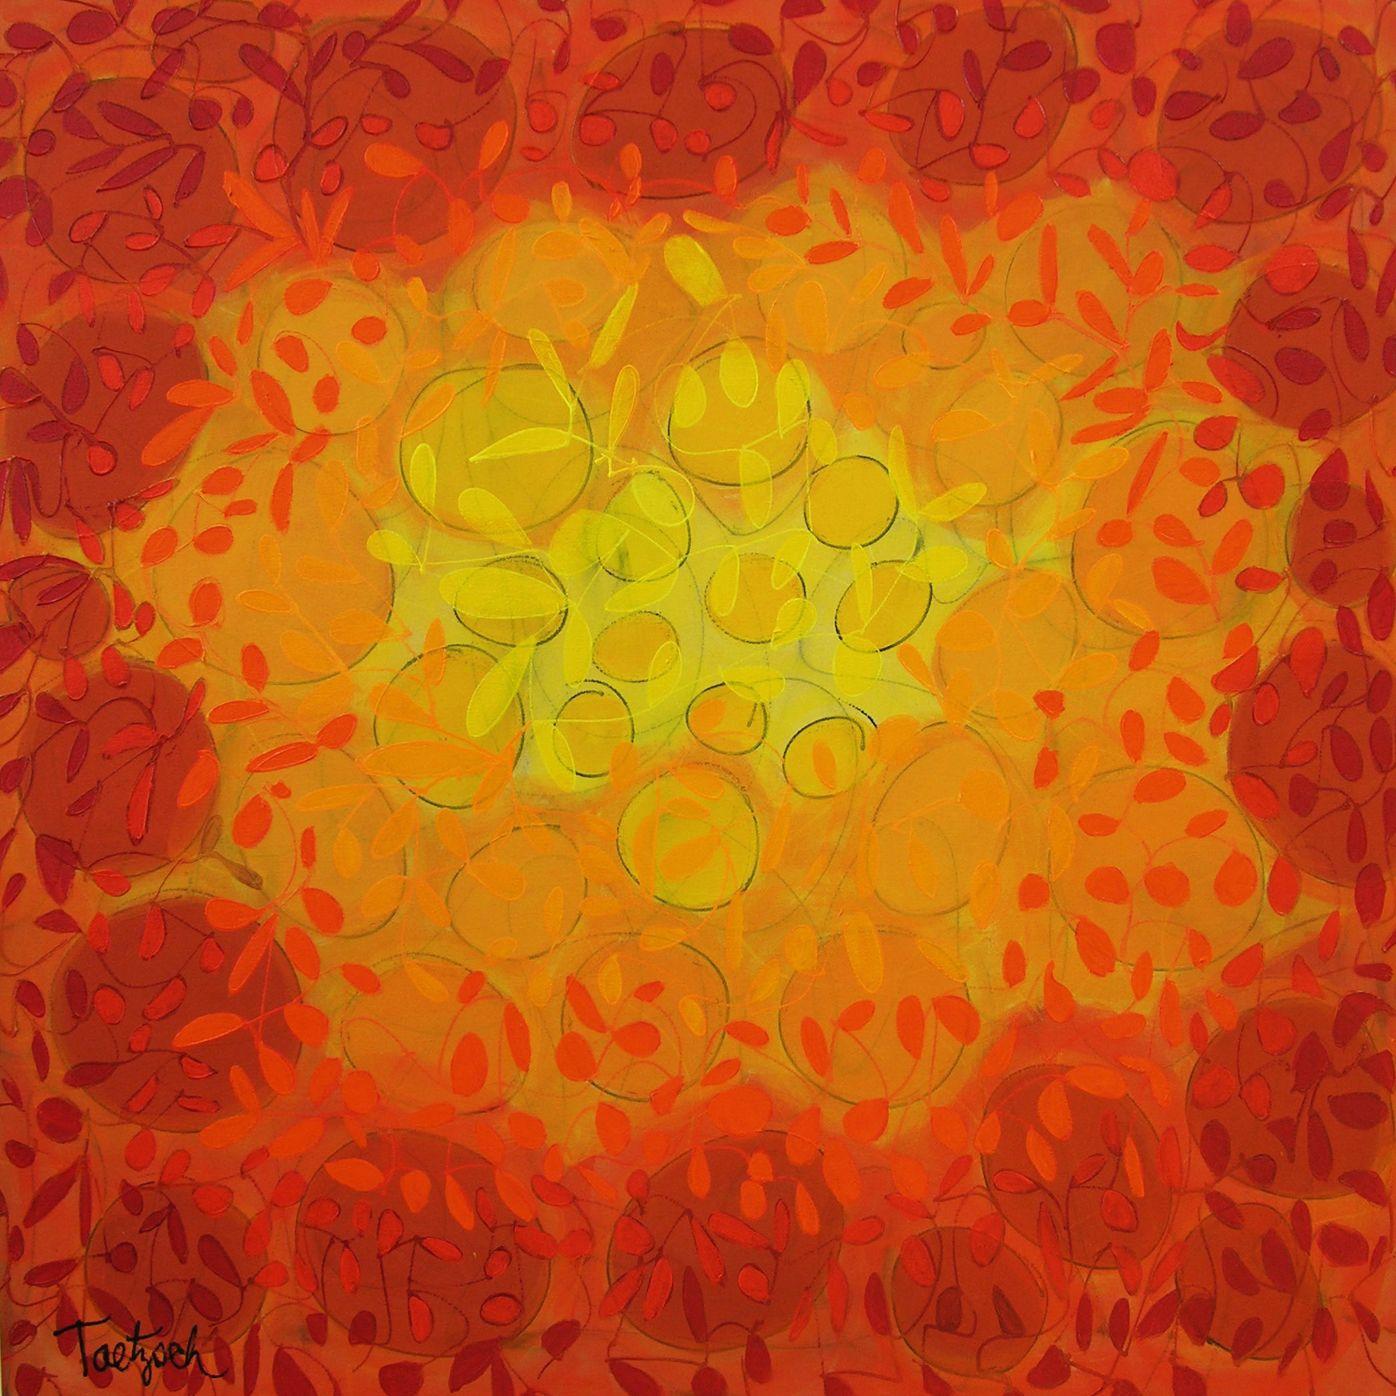 Lynne Taetzsch Abstract Painting - Sunburst, Painting, Acrylic on Canvas